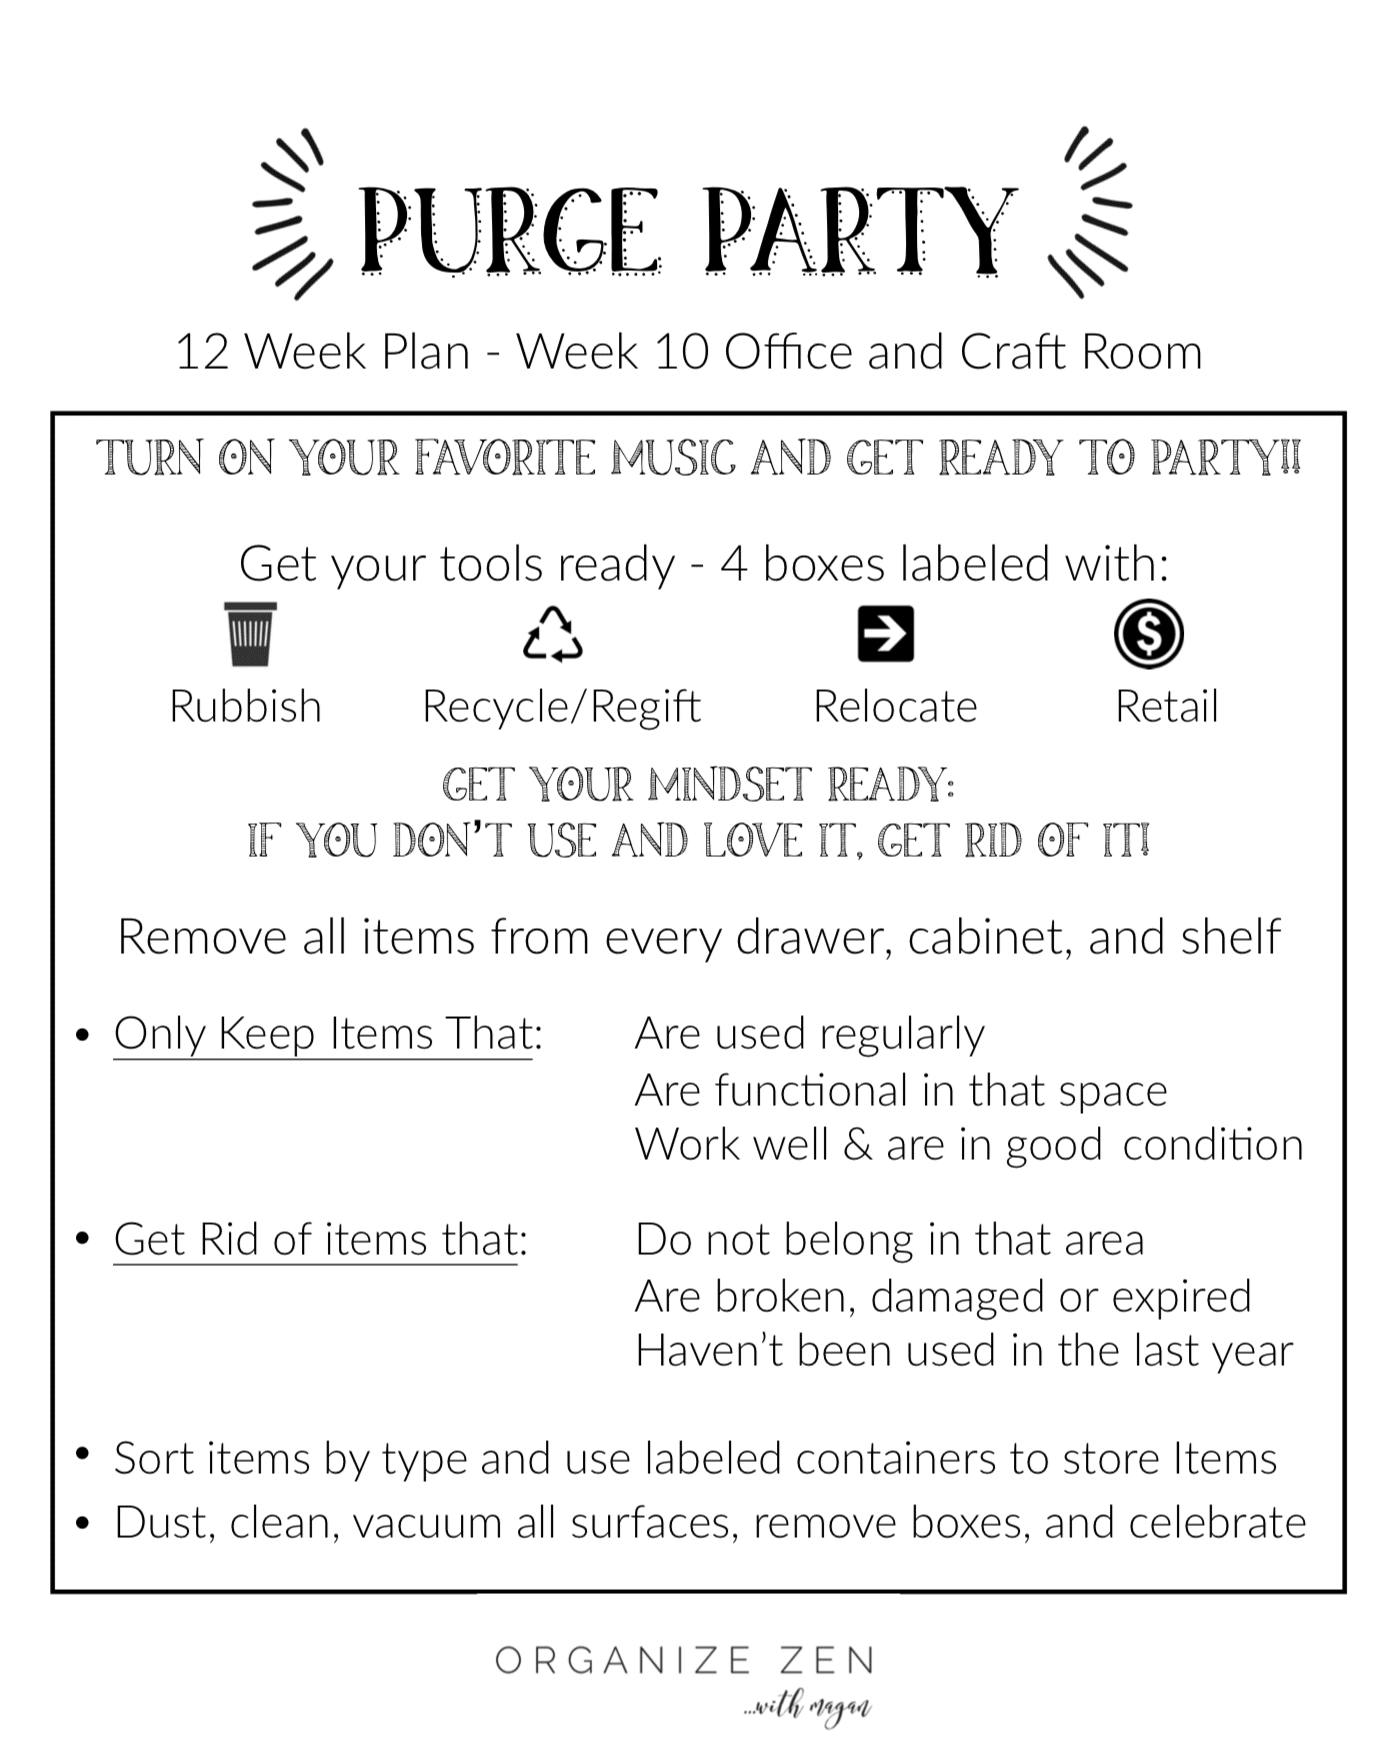 Purge Party Printable Decluttering plan for the office